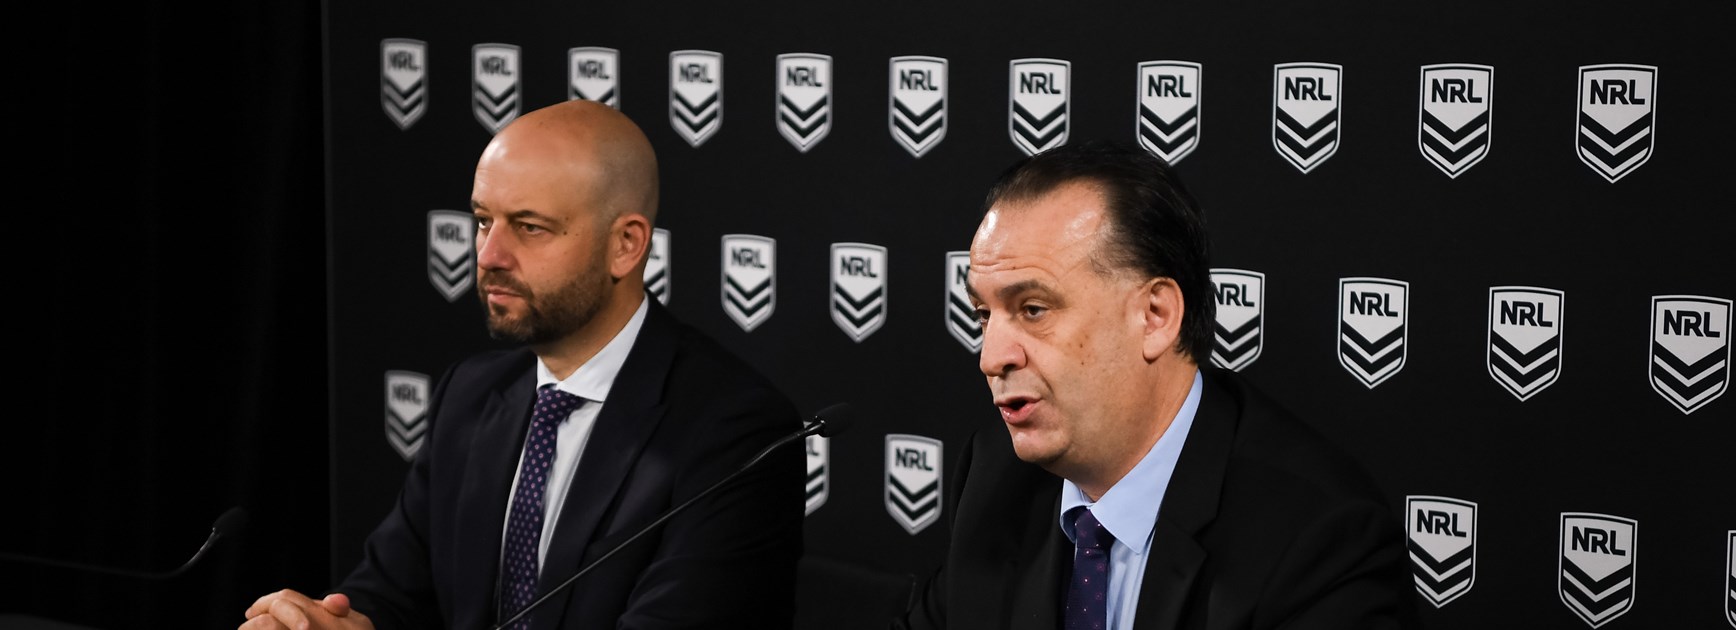 NRL announces competition to continue despite increased travel restrictions